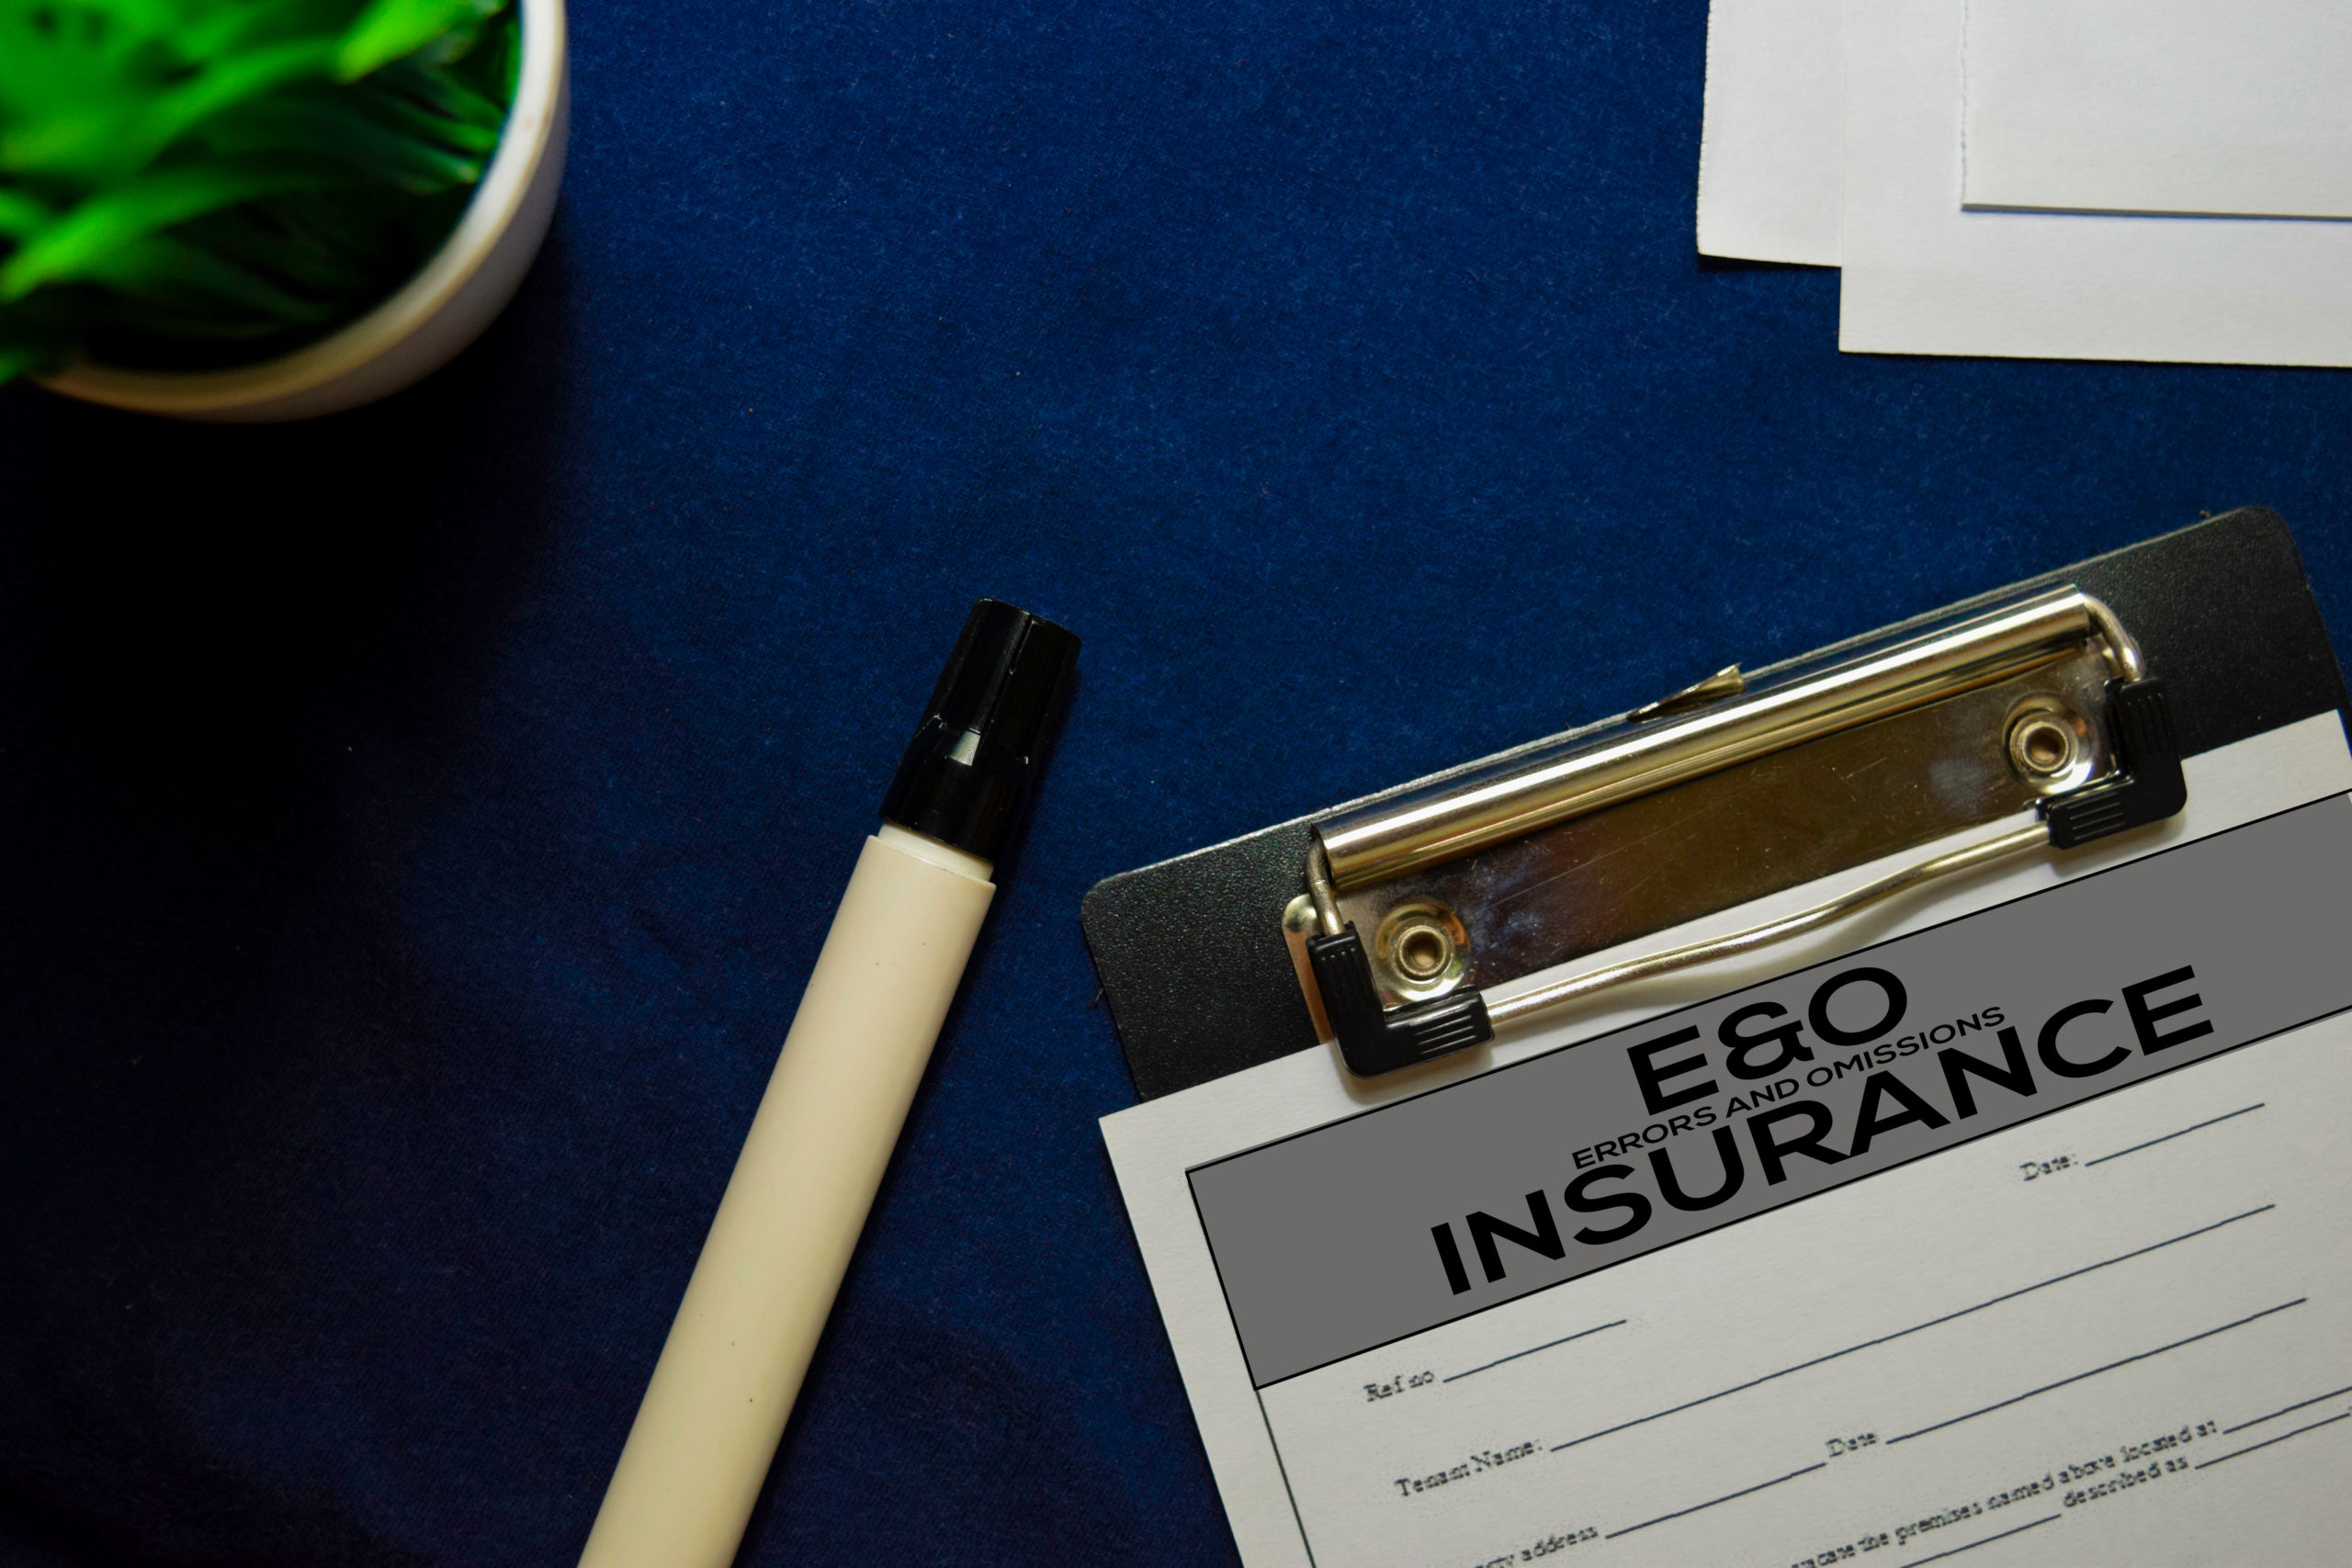 Capped marker lies next to clipboard on desktop, paper form on clipboard is titled “E&O Insurance.”